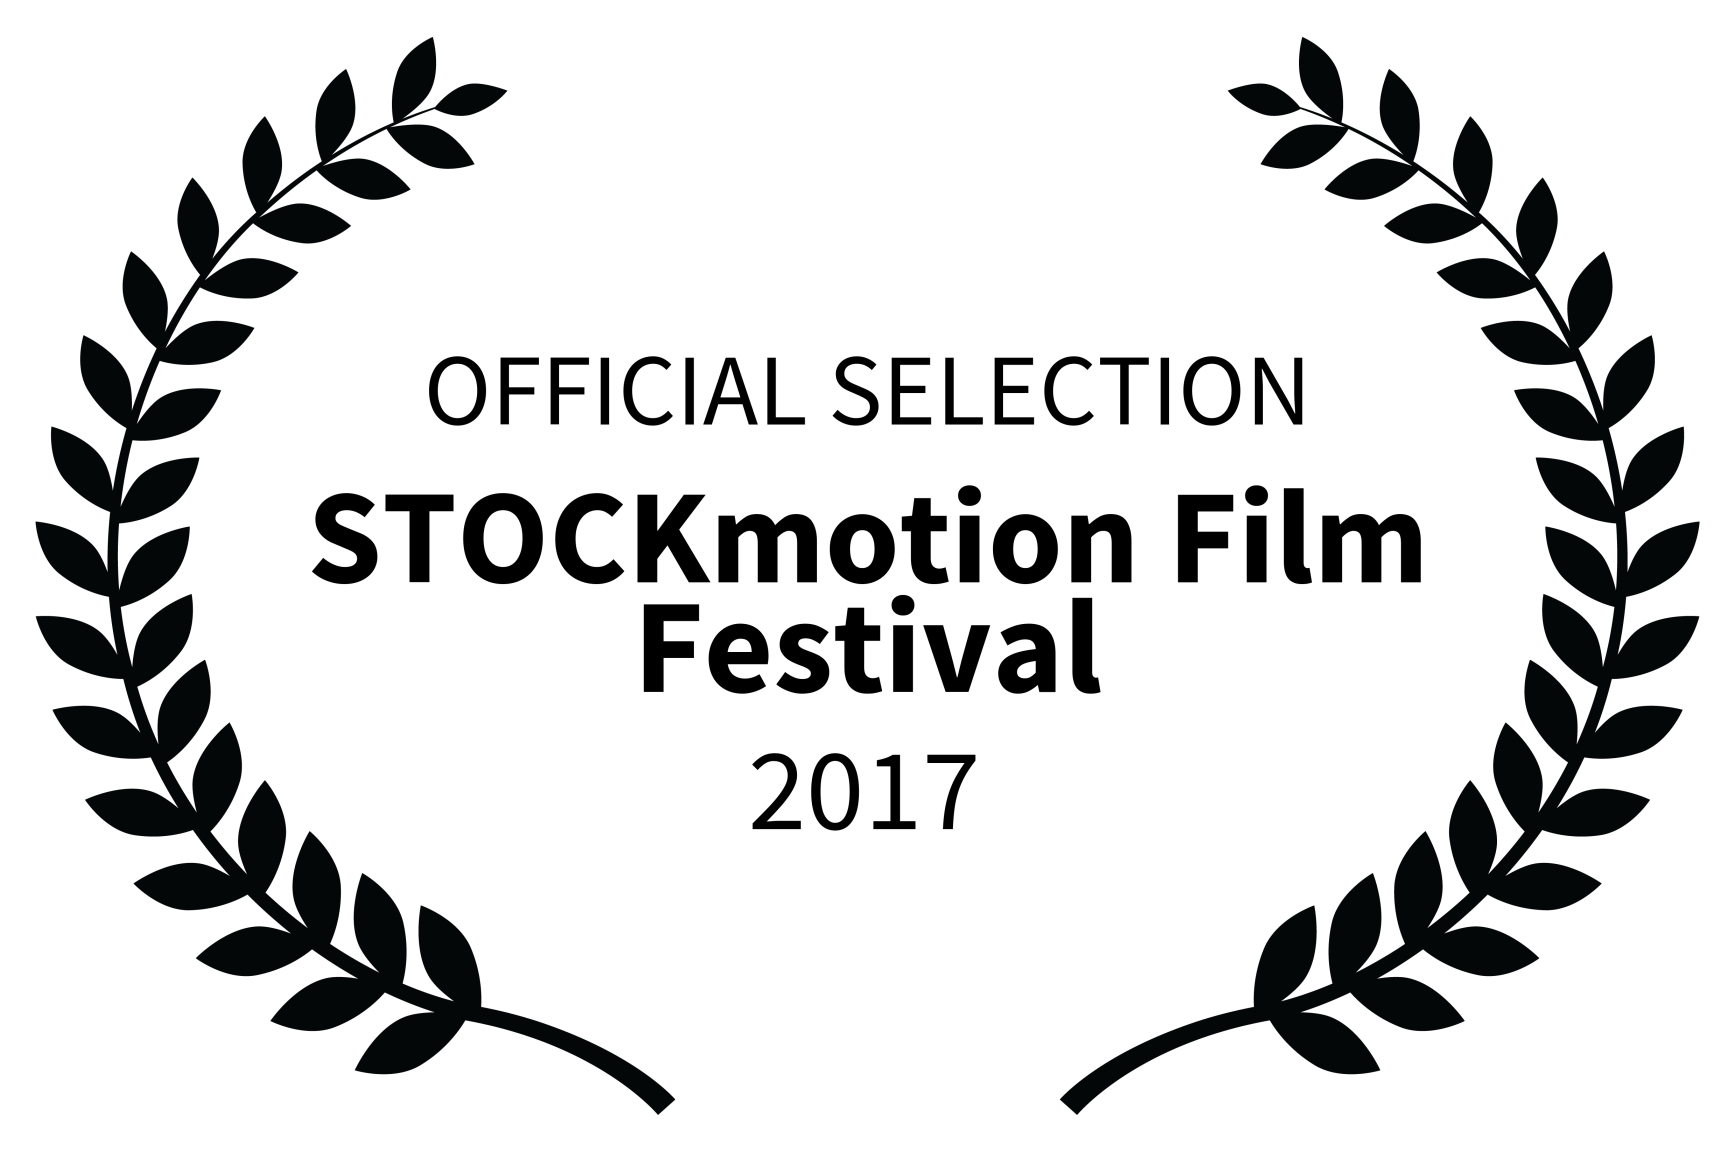 OFFICIAL SELECTION - STOCKmotion Film Festival - 2017